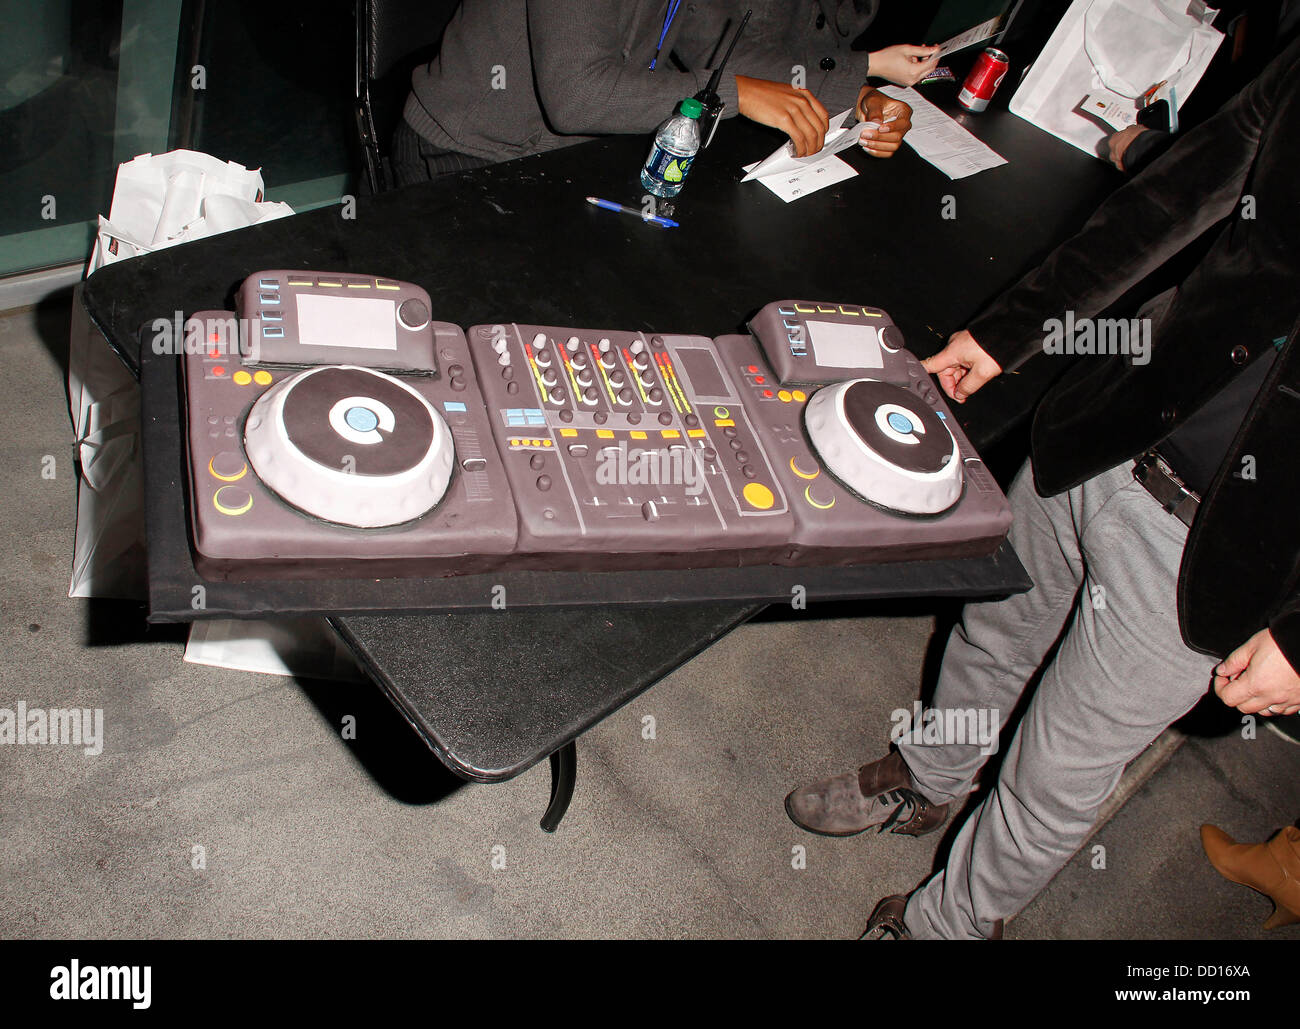 Divine Melts - A 40th birthday dj cake I loved working on.... | Facebook